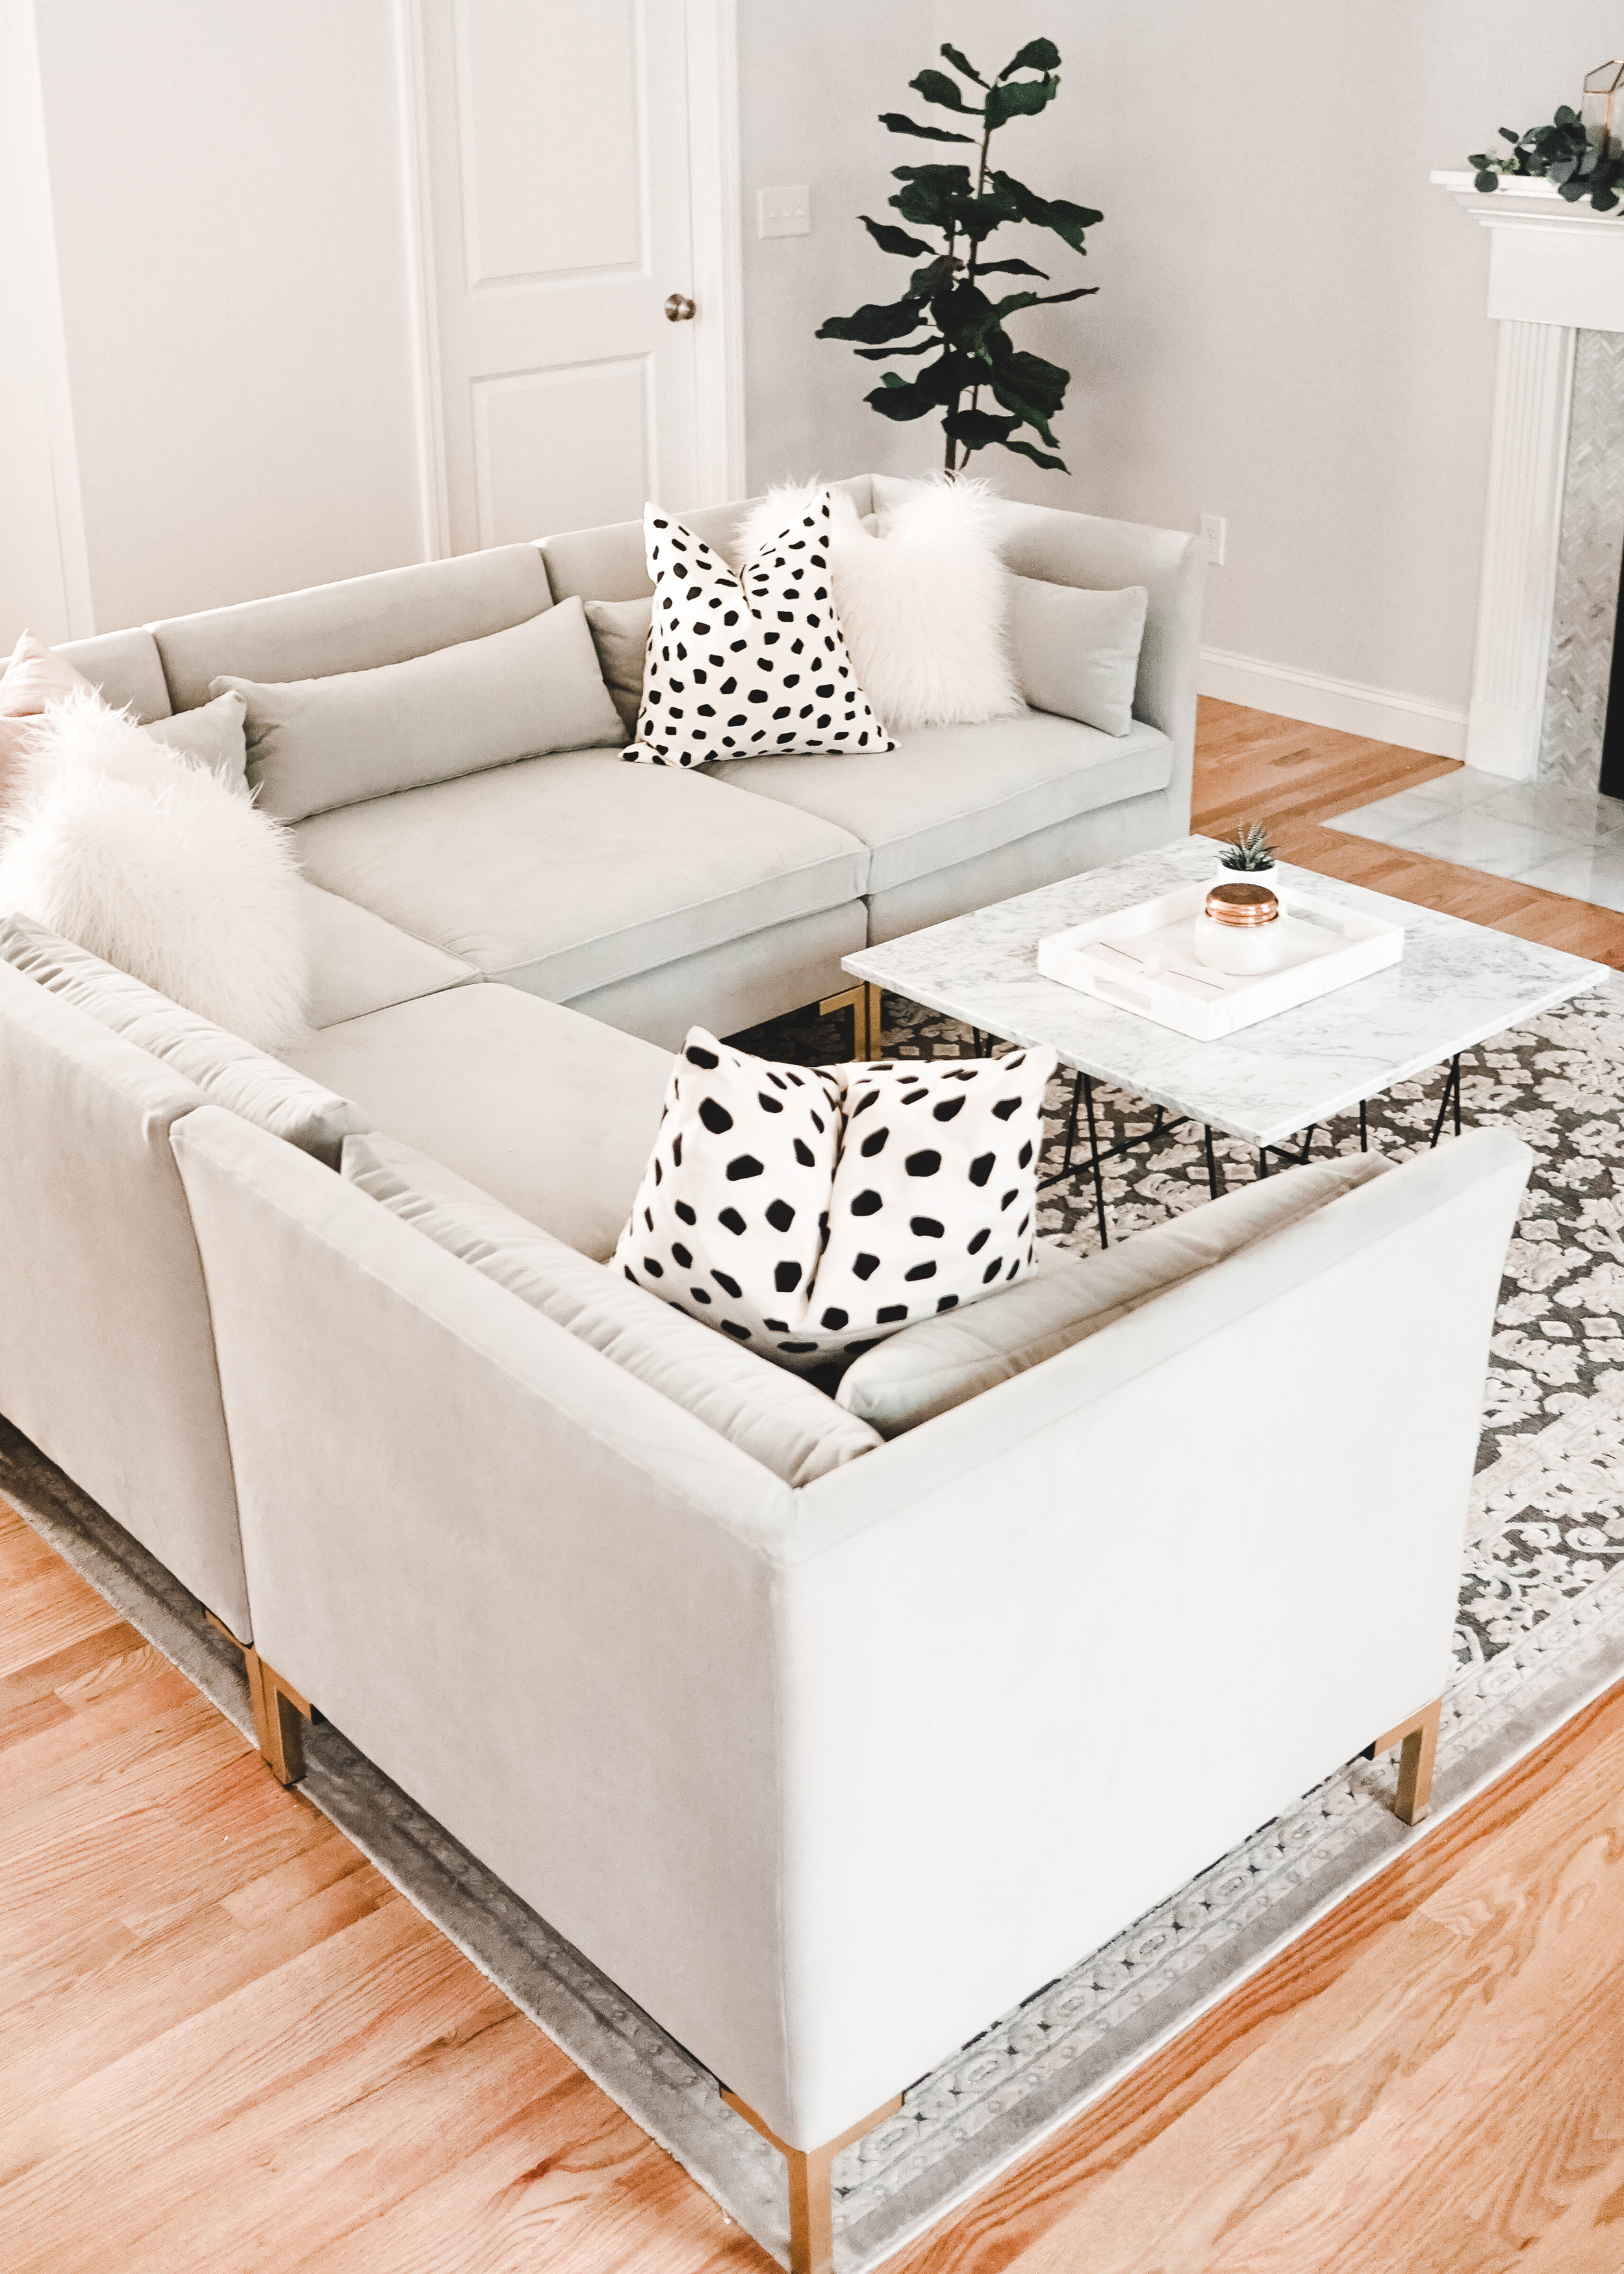 Living Room Update With Raymour, Raymond And Flanigan Sectional Sofas